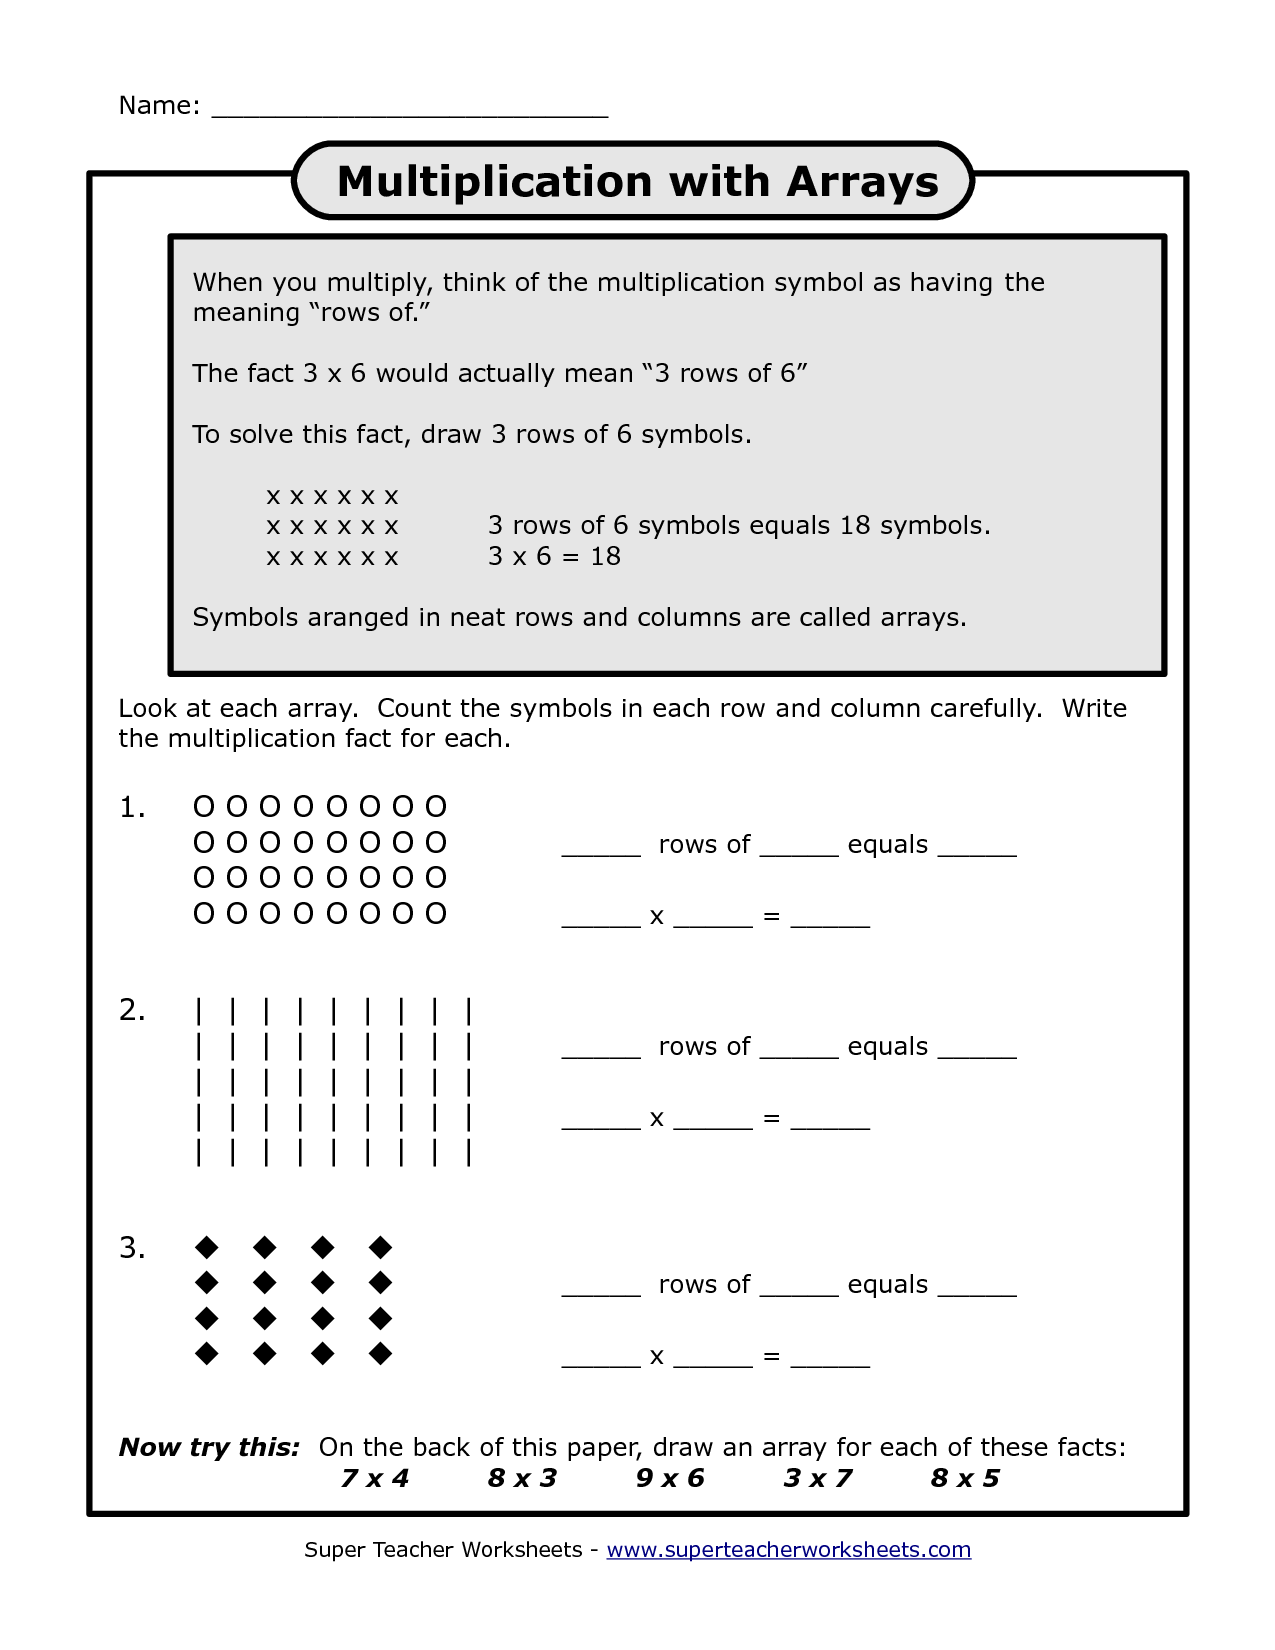 multiplying-with-arrays-worksheets